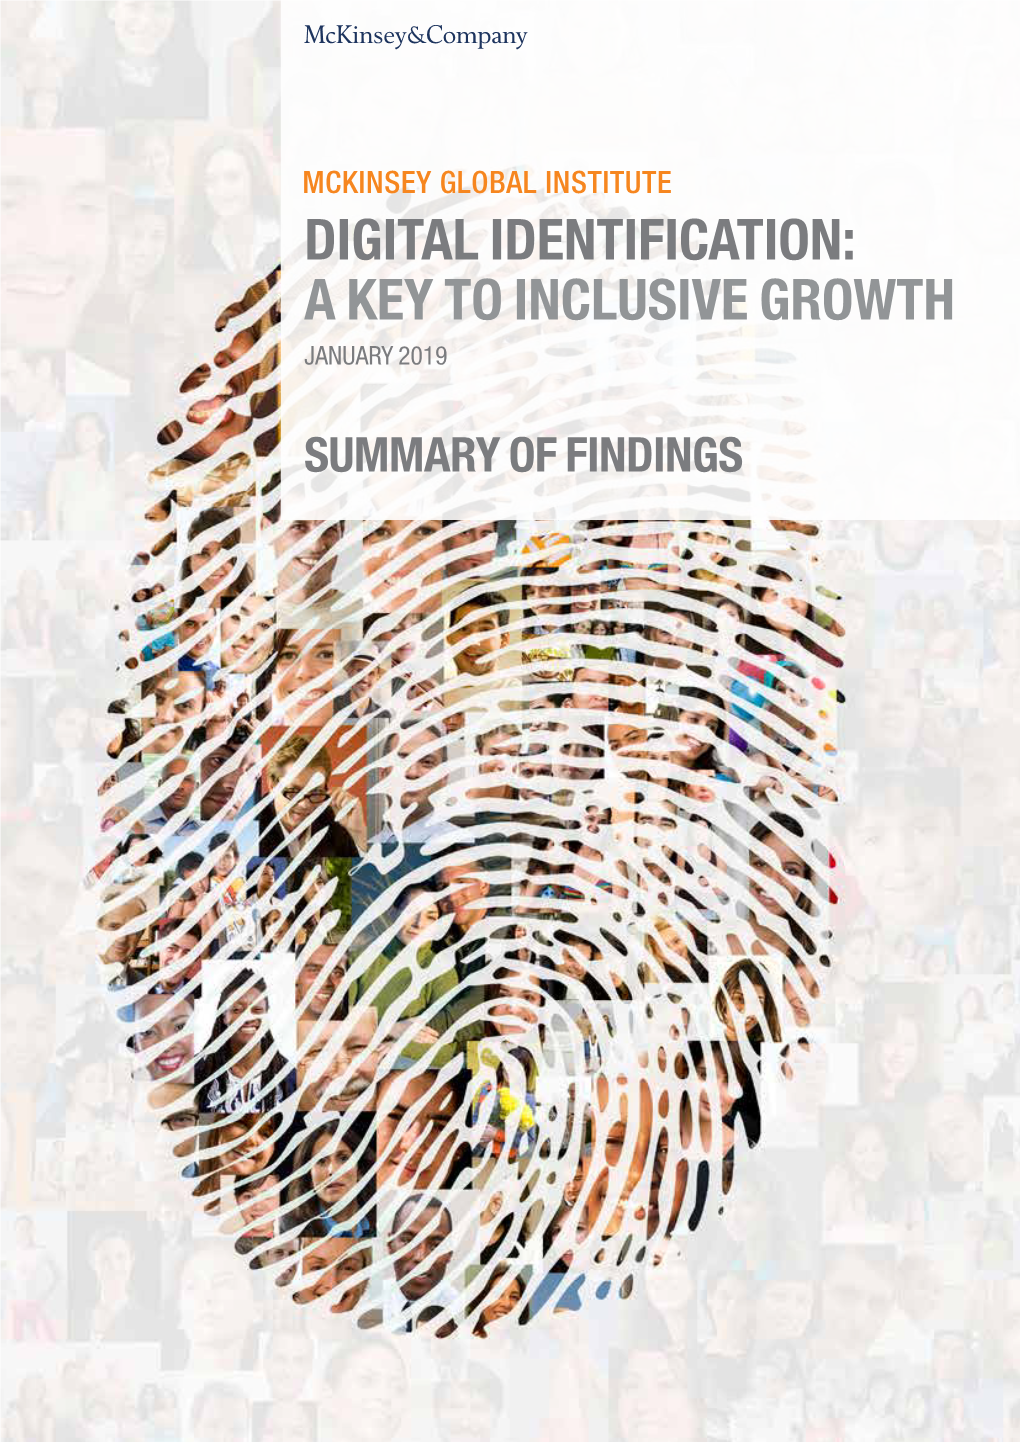 Digital Identification: a Key to Inclusive Growth January 2019